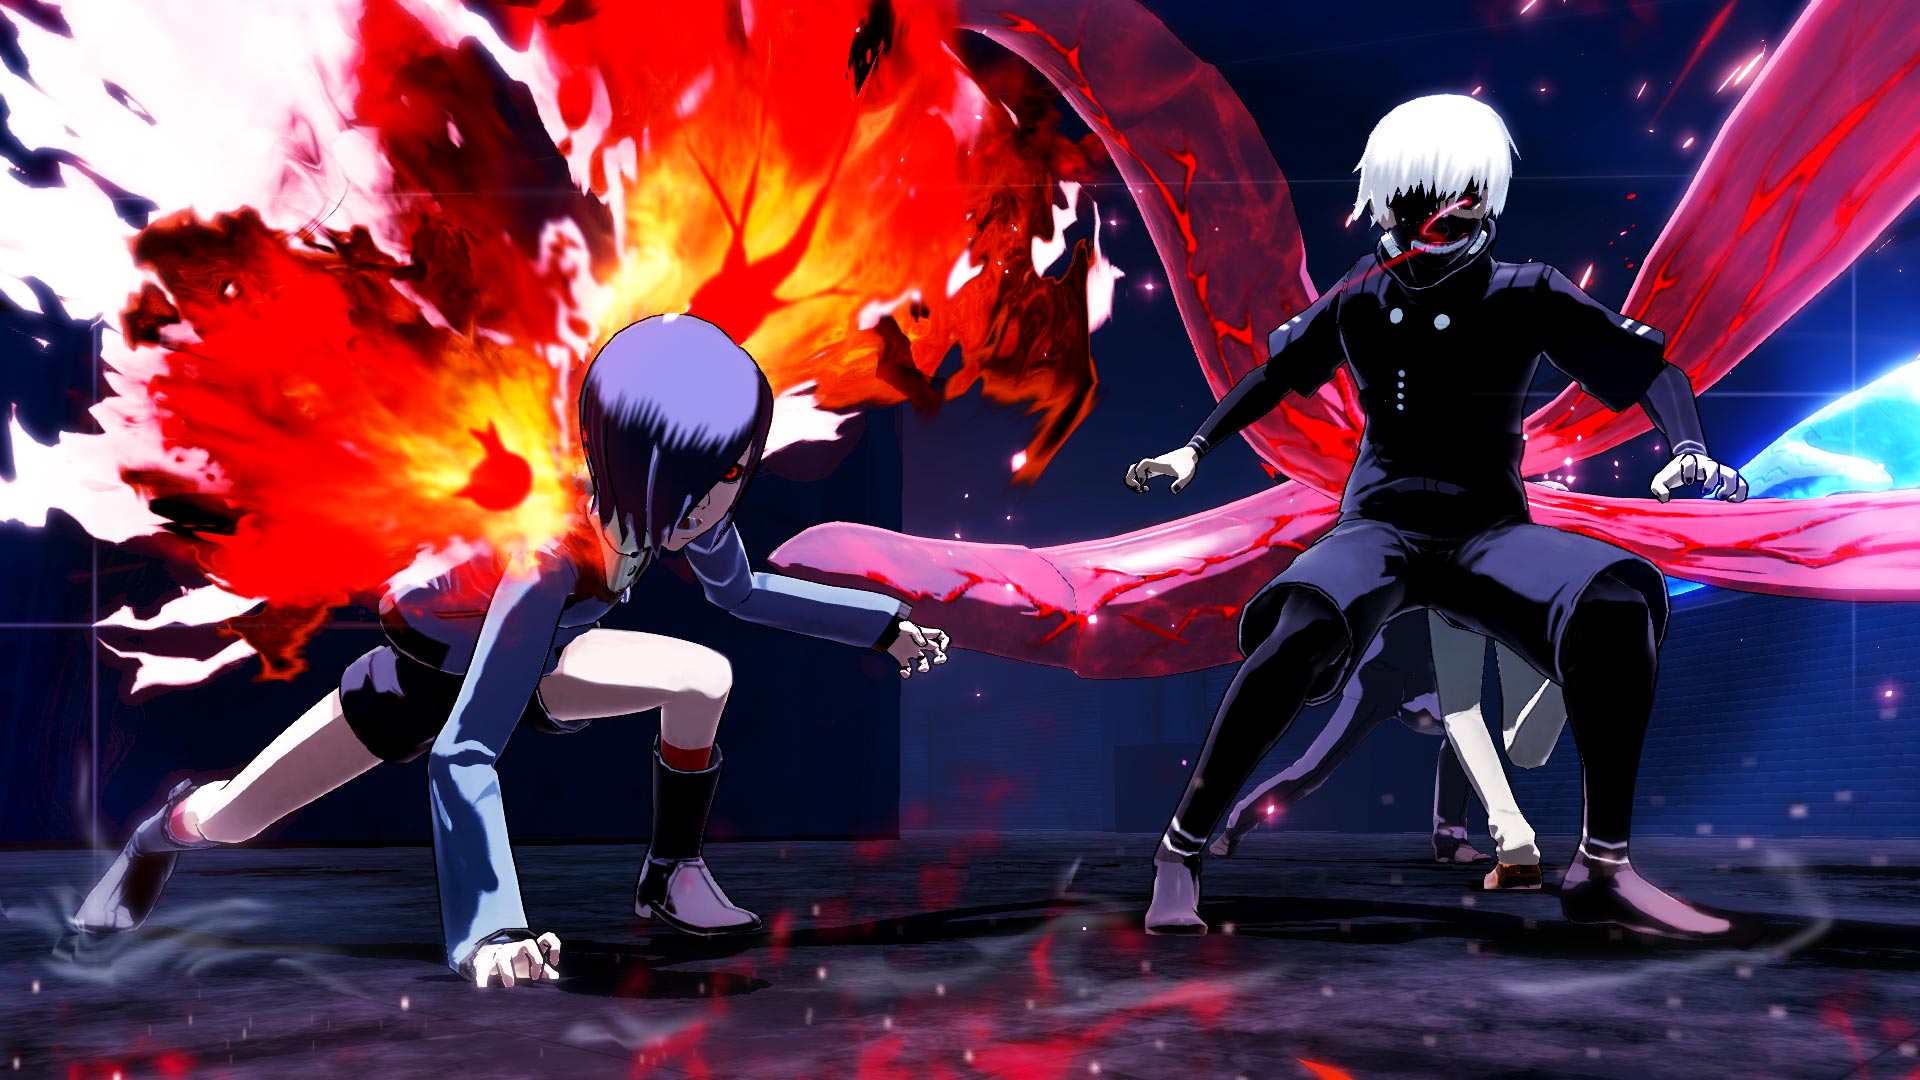 Tokyo Ghoul Re Call To Exist For Ps4 Buy Cheaper In Official Store Psprices Ireland